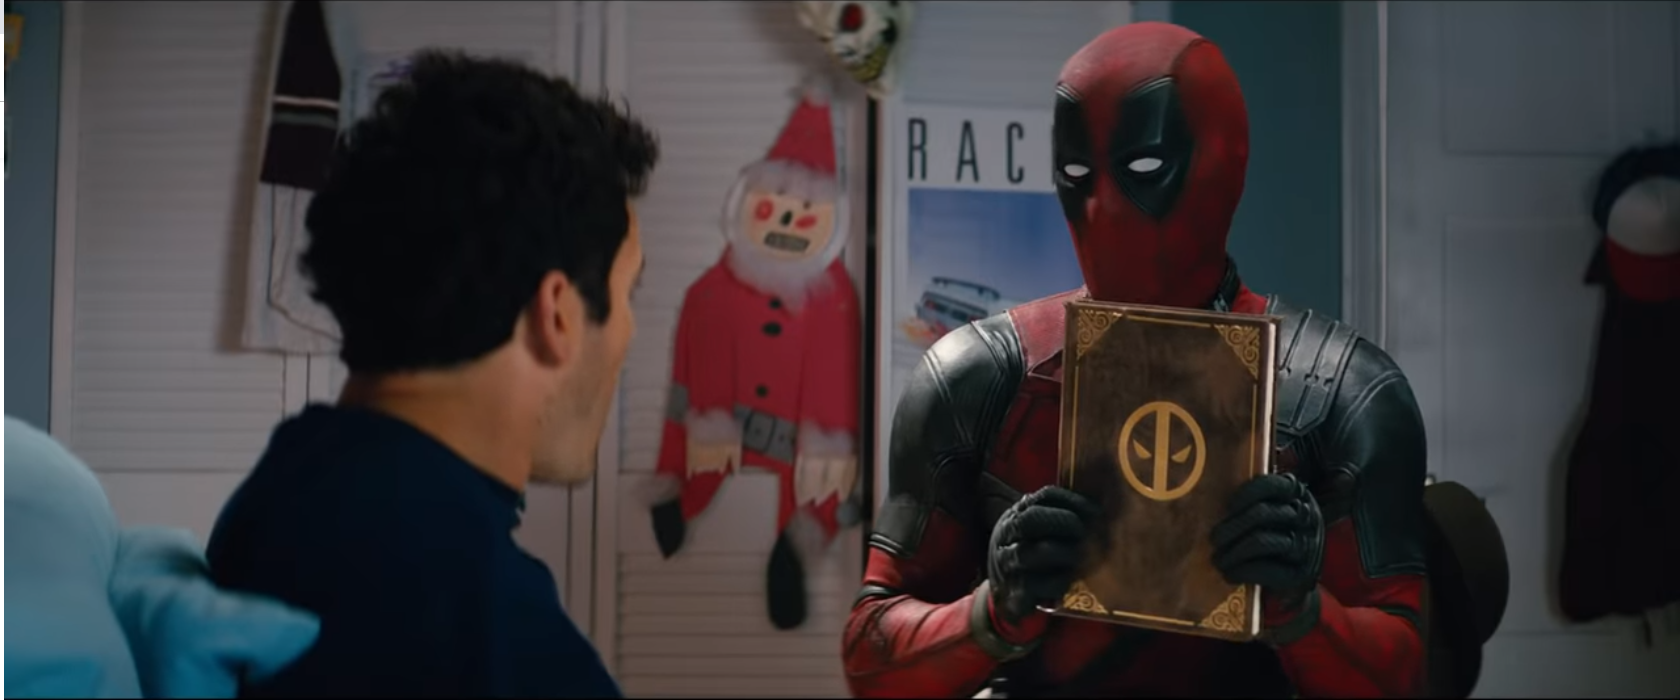 "Once Upon a Deadpool"